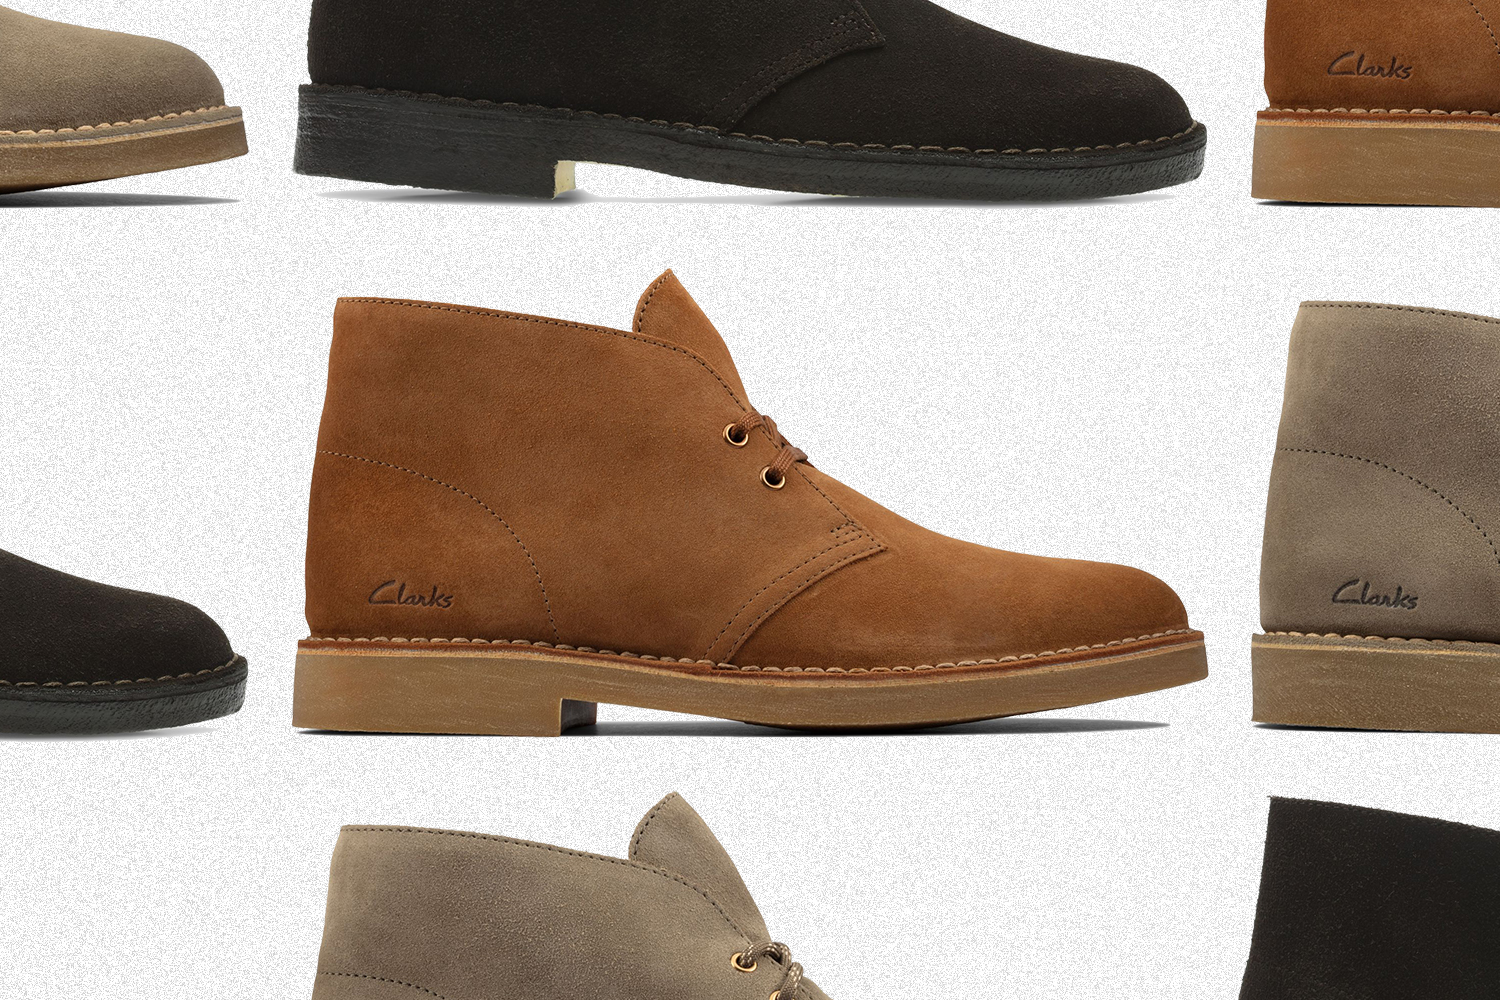 Desert Boots Are Included in This Summer Clarks Sale - InsideHook